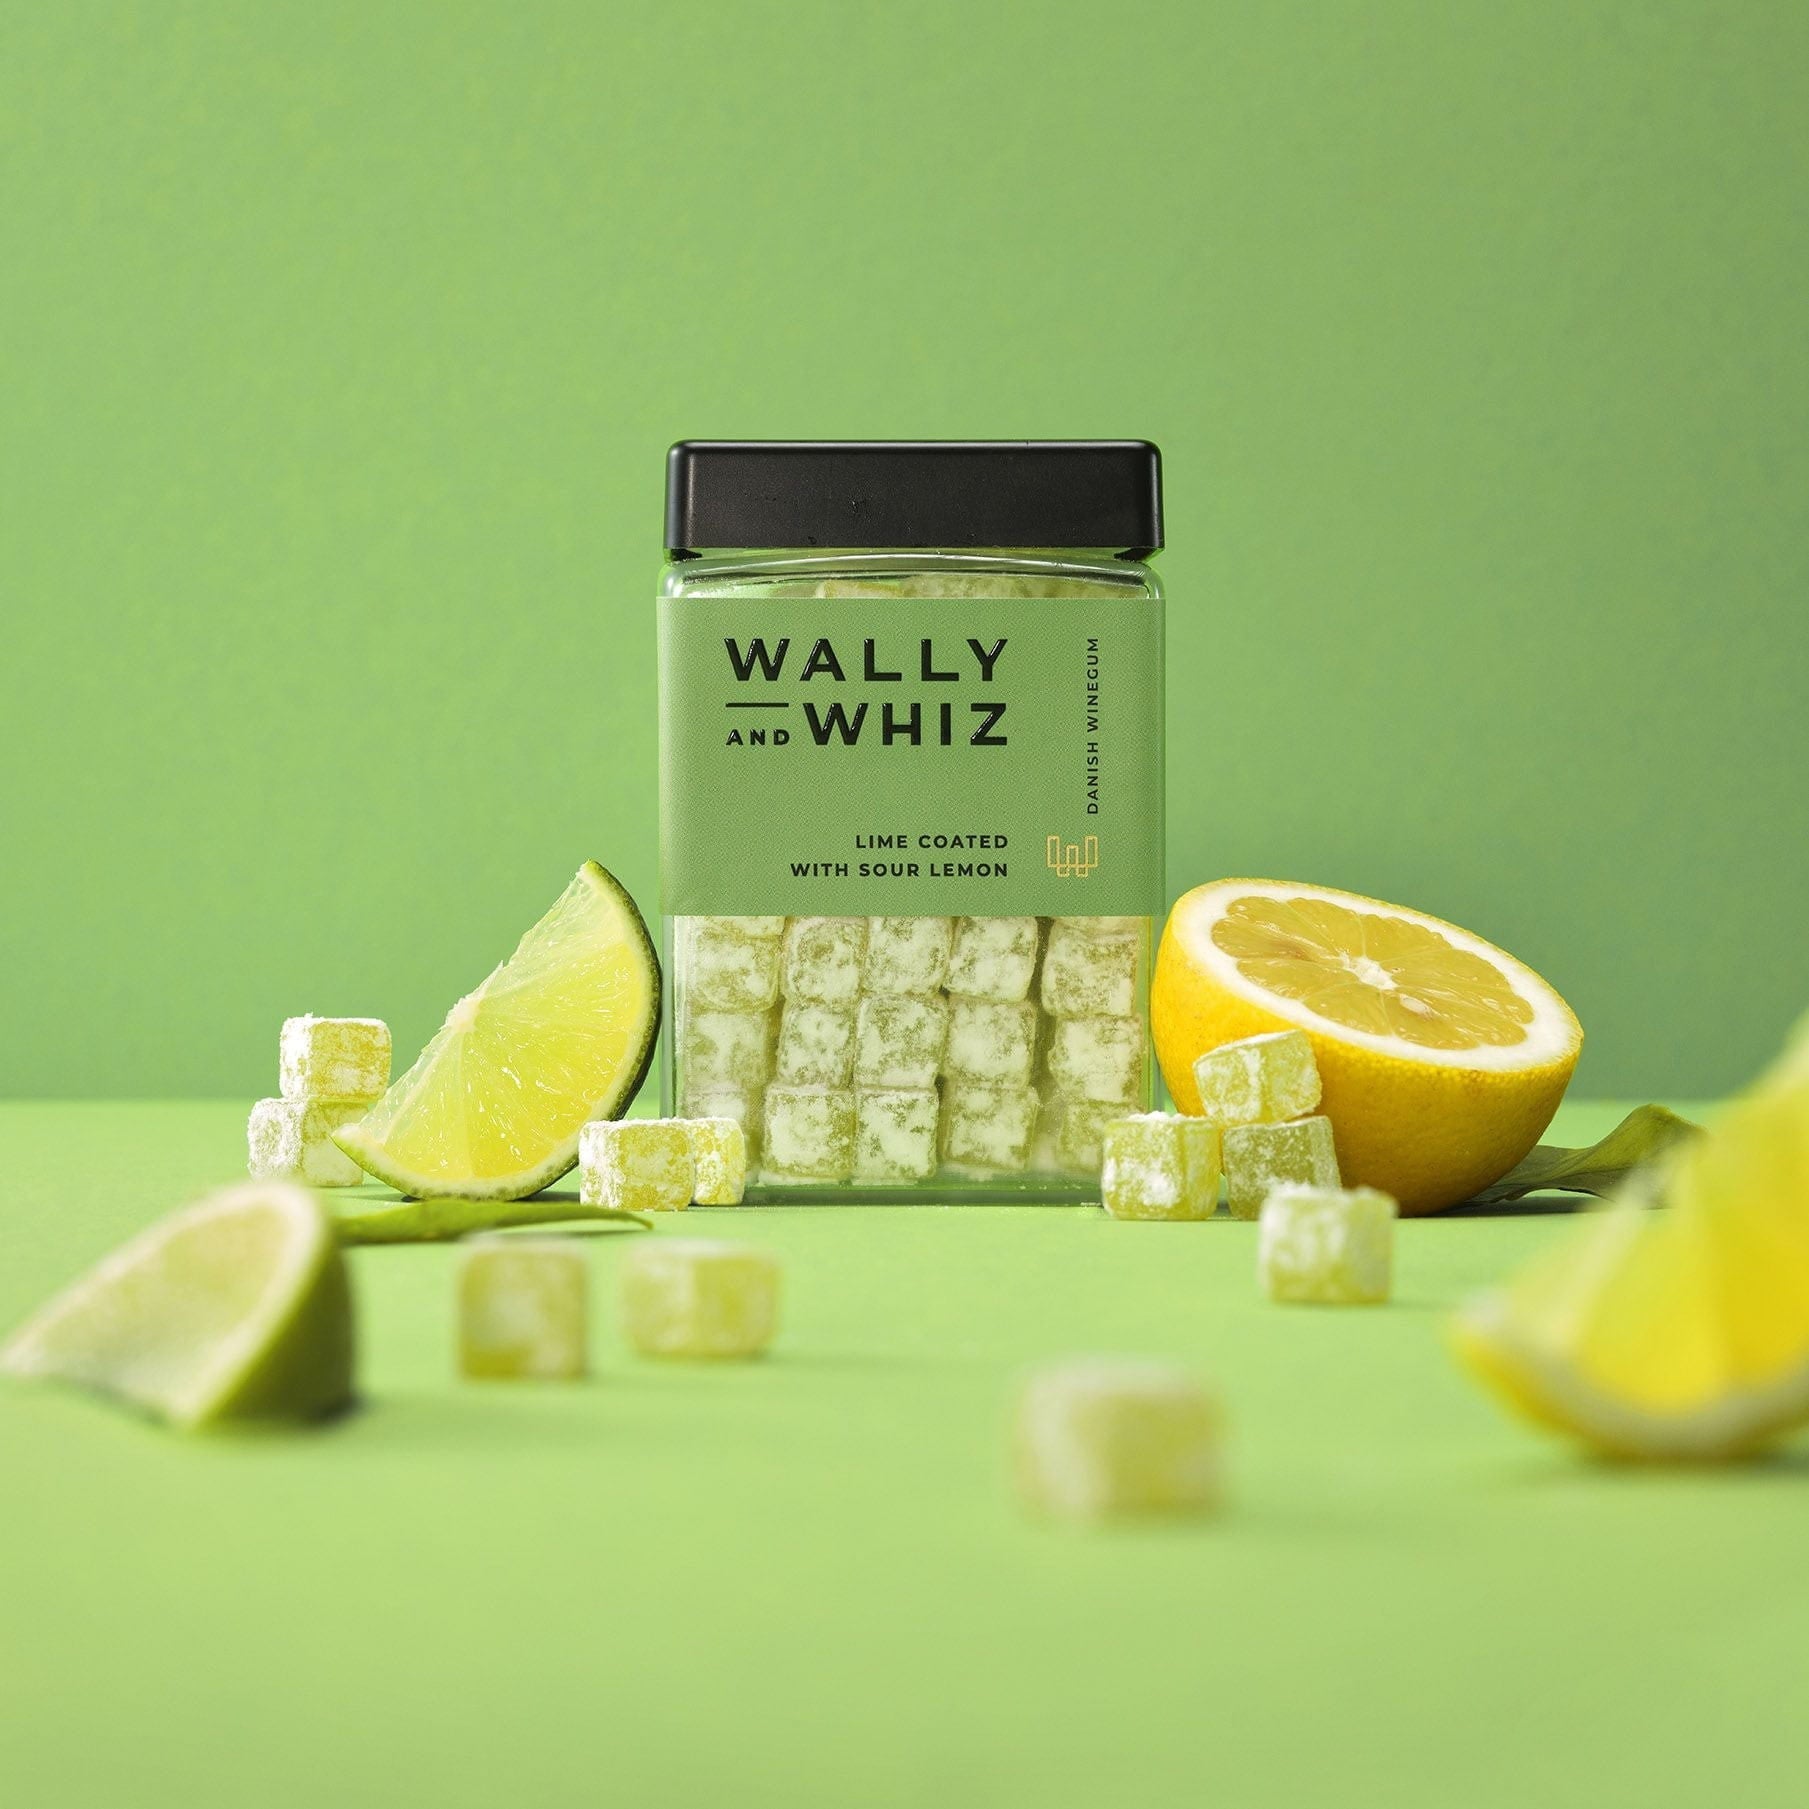 Wally and Whiz Vingummi Cube Lime Med Sur Citron, 240g